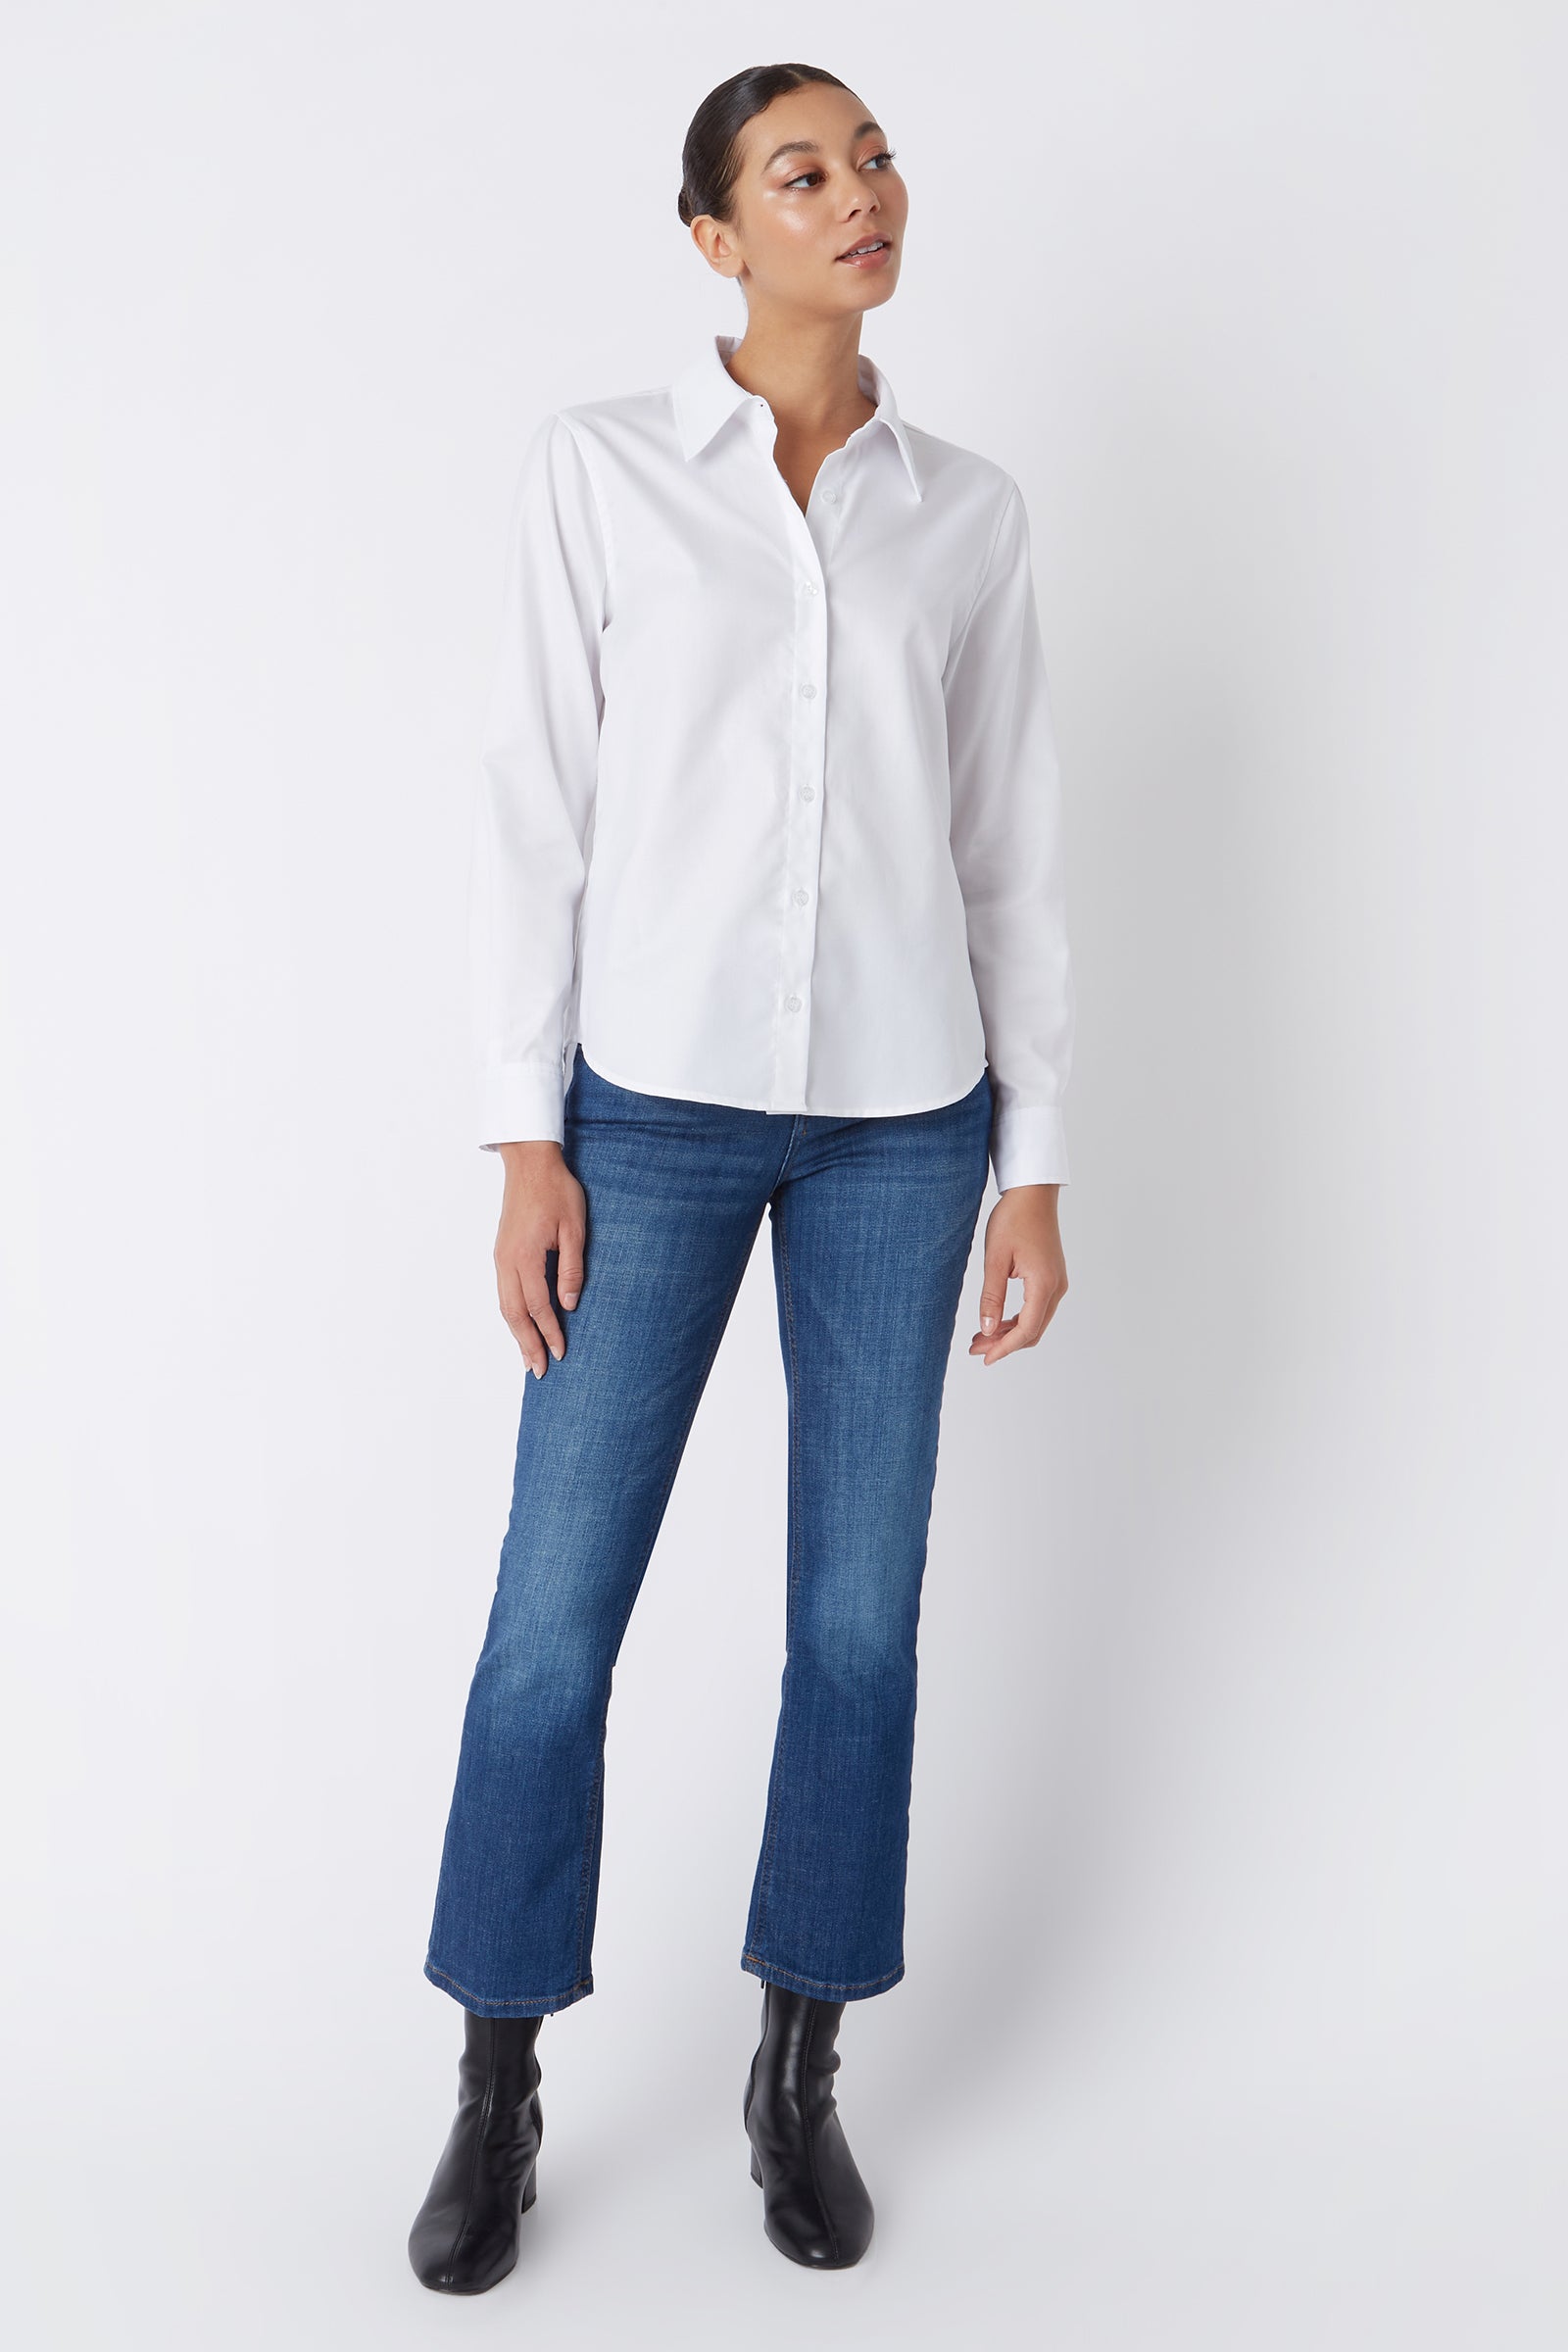 Kal Rieman Classic Tailored Shirt in White Stretch on Model Looking Left Full Front View